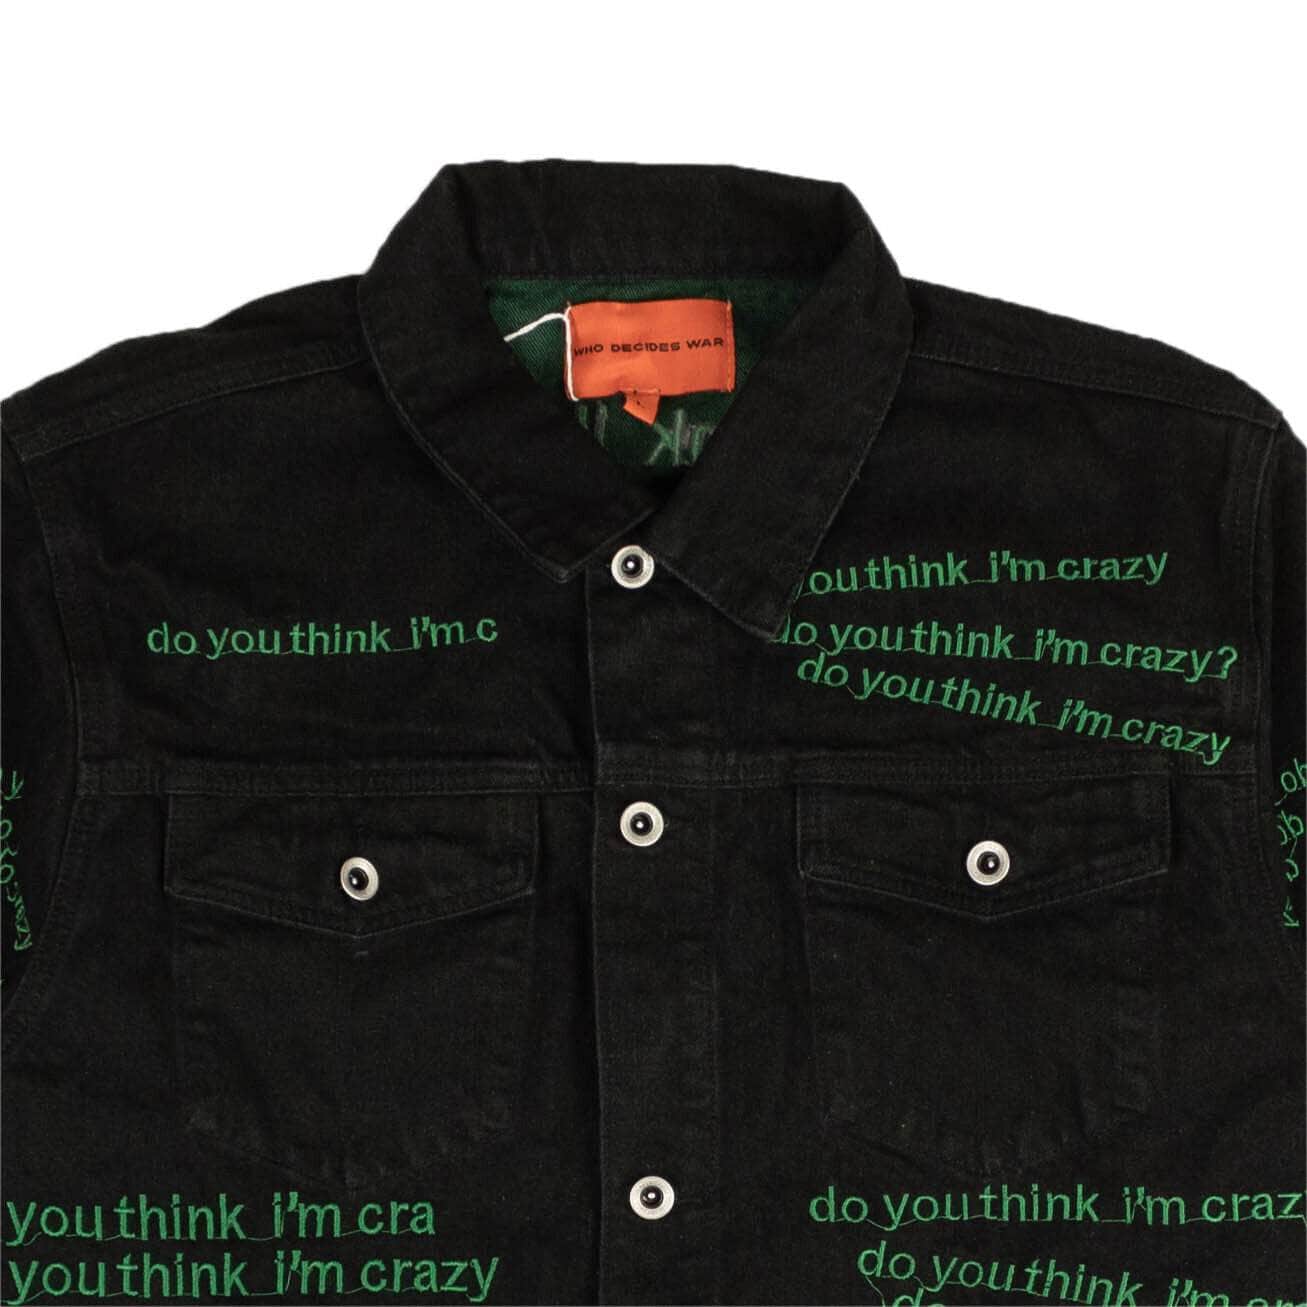 Who Decides War 500-750, channelenable-all, chicmi, couponcollection, gender-mens, main-clothing, mens-shoes, size-l, size-s, uncategorized, who-decides-war Black Green Monster Distressed Denim Jacket